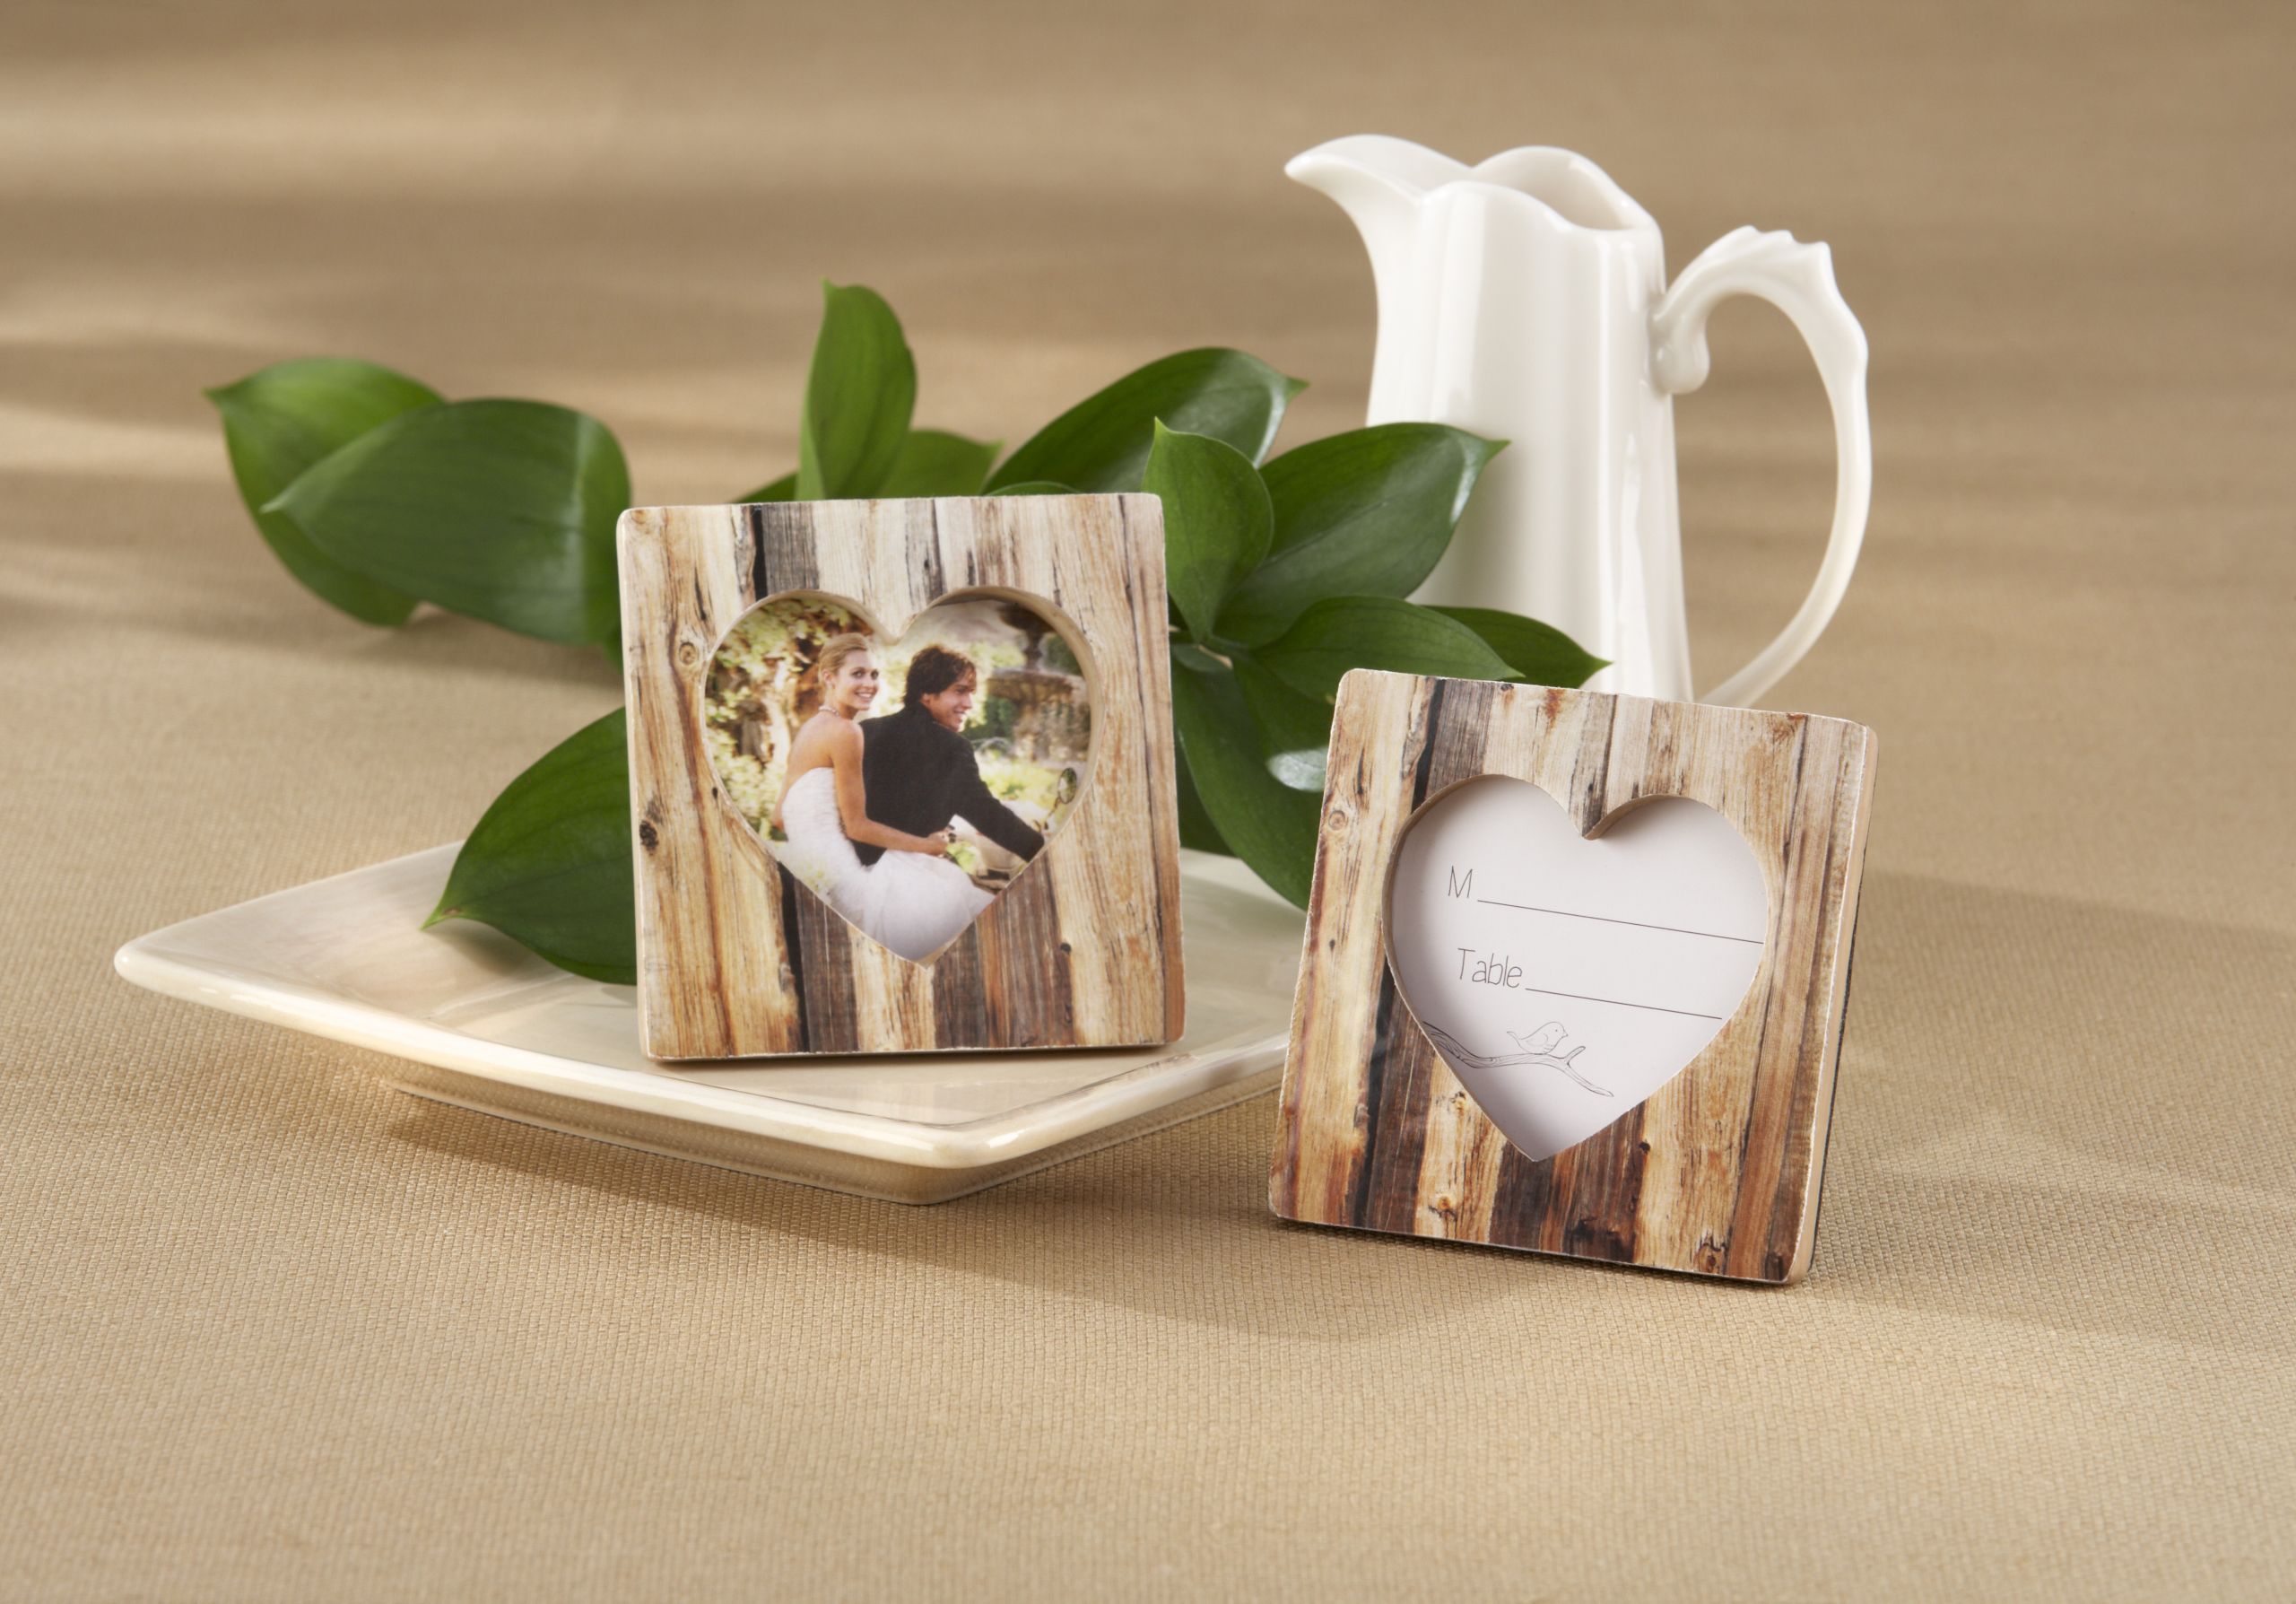 Picture Frame Wedding Favors
 Rustic Wedding Favors By Kate Aspen Rustic Wedding Chic